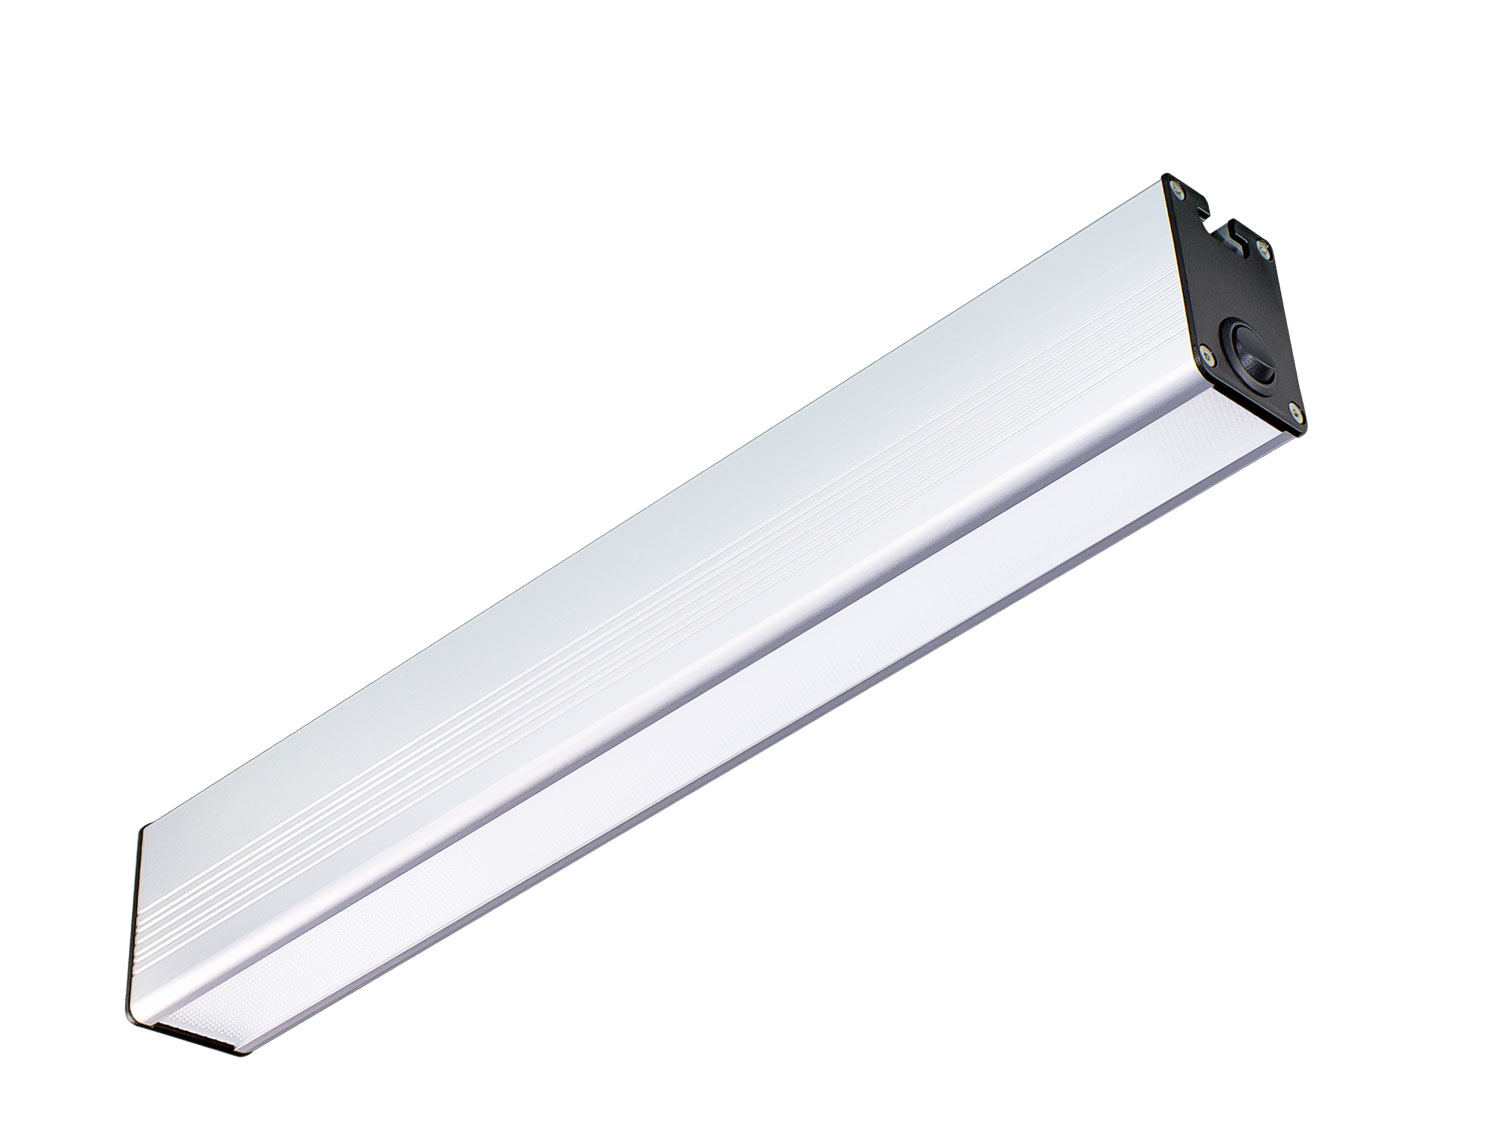 Profile luminaire with T-slot on the back PROFILED AC, 900 mm, microprism cover, 220-240V AC